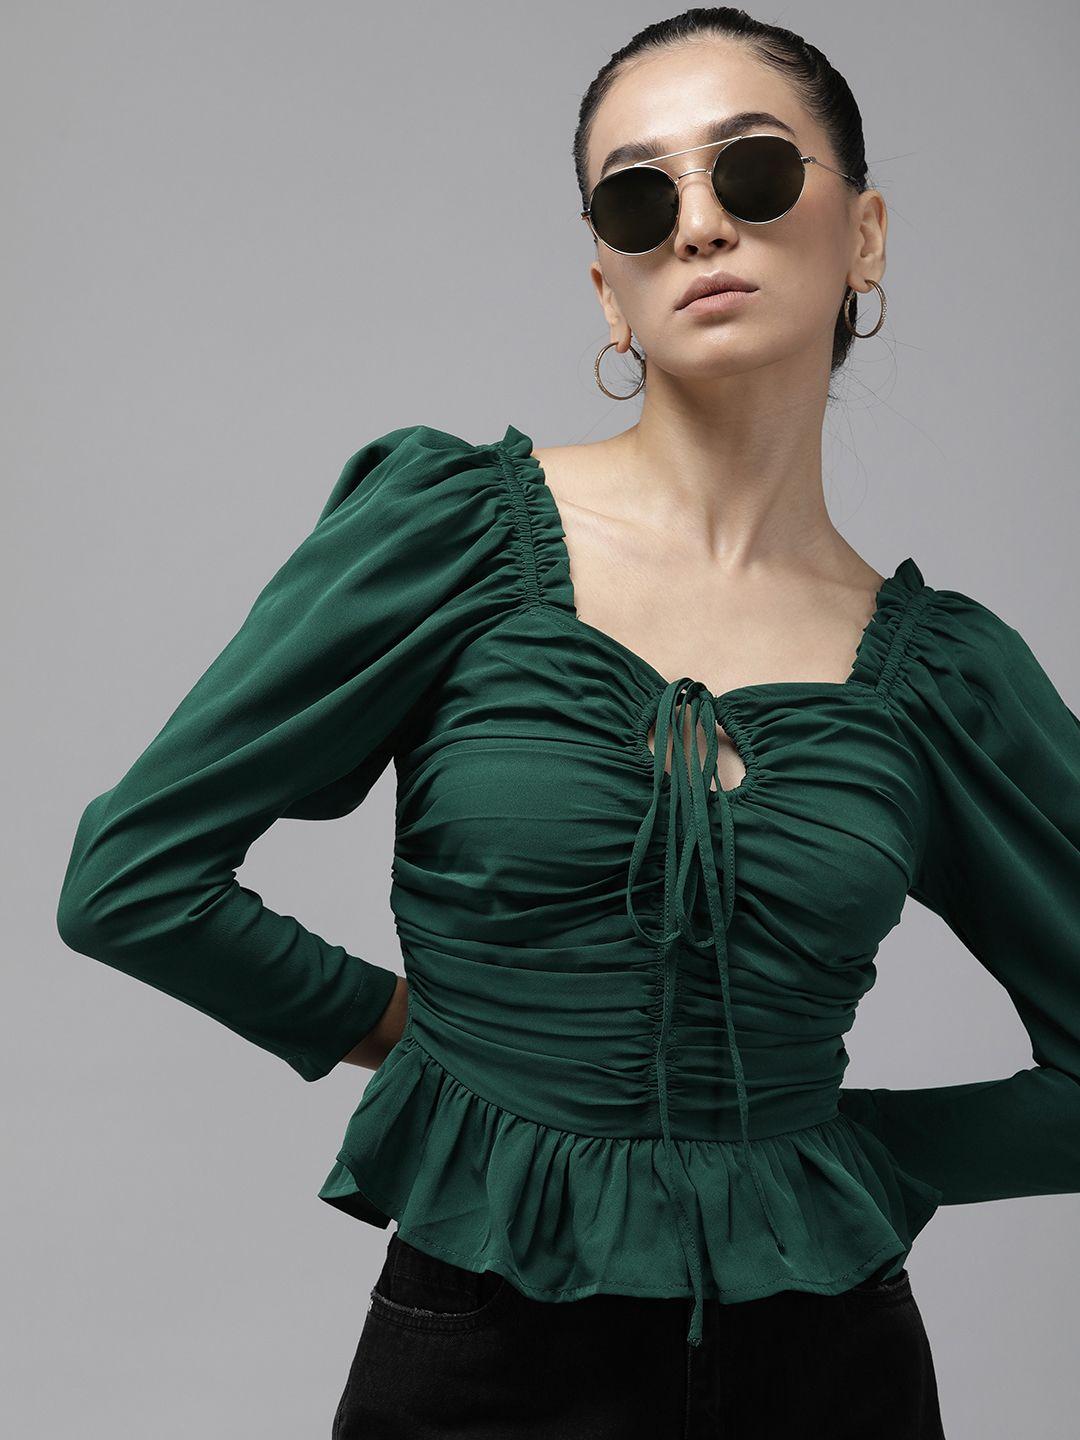 the roadster life co. keyhole neck smoked detail ruched peplum top